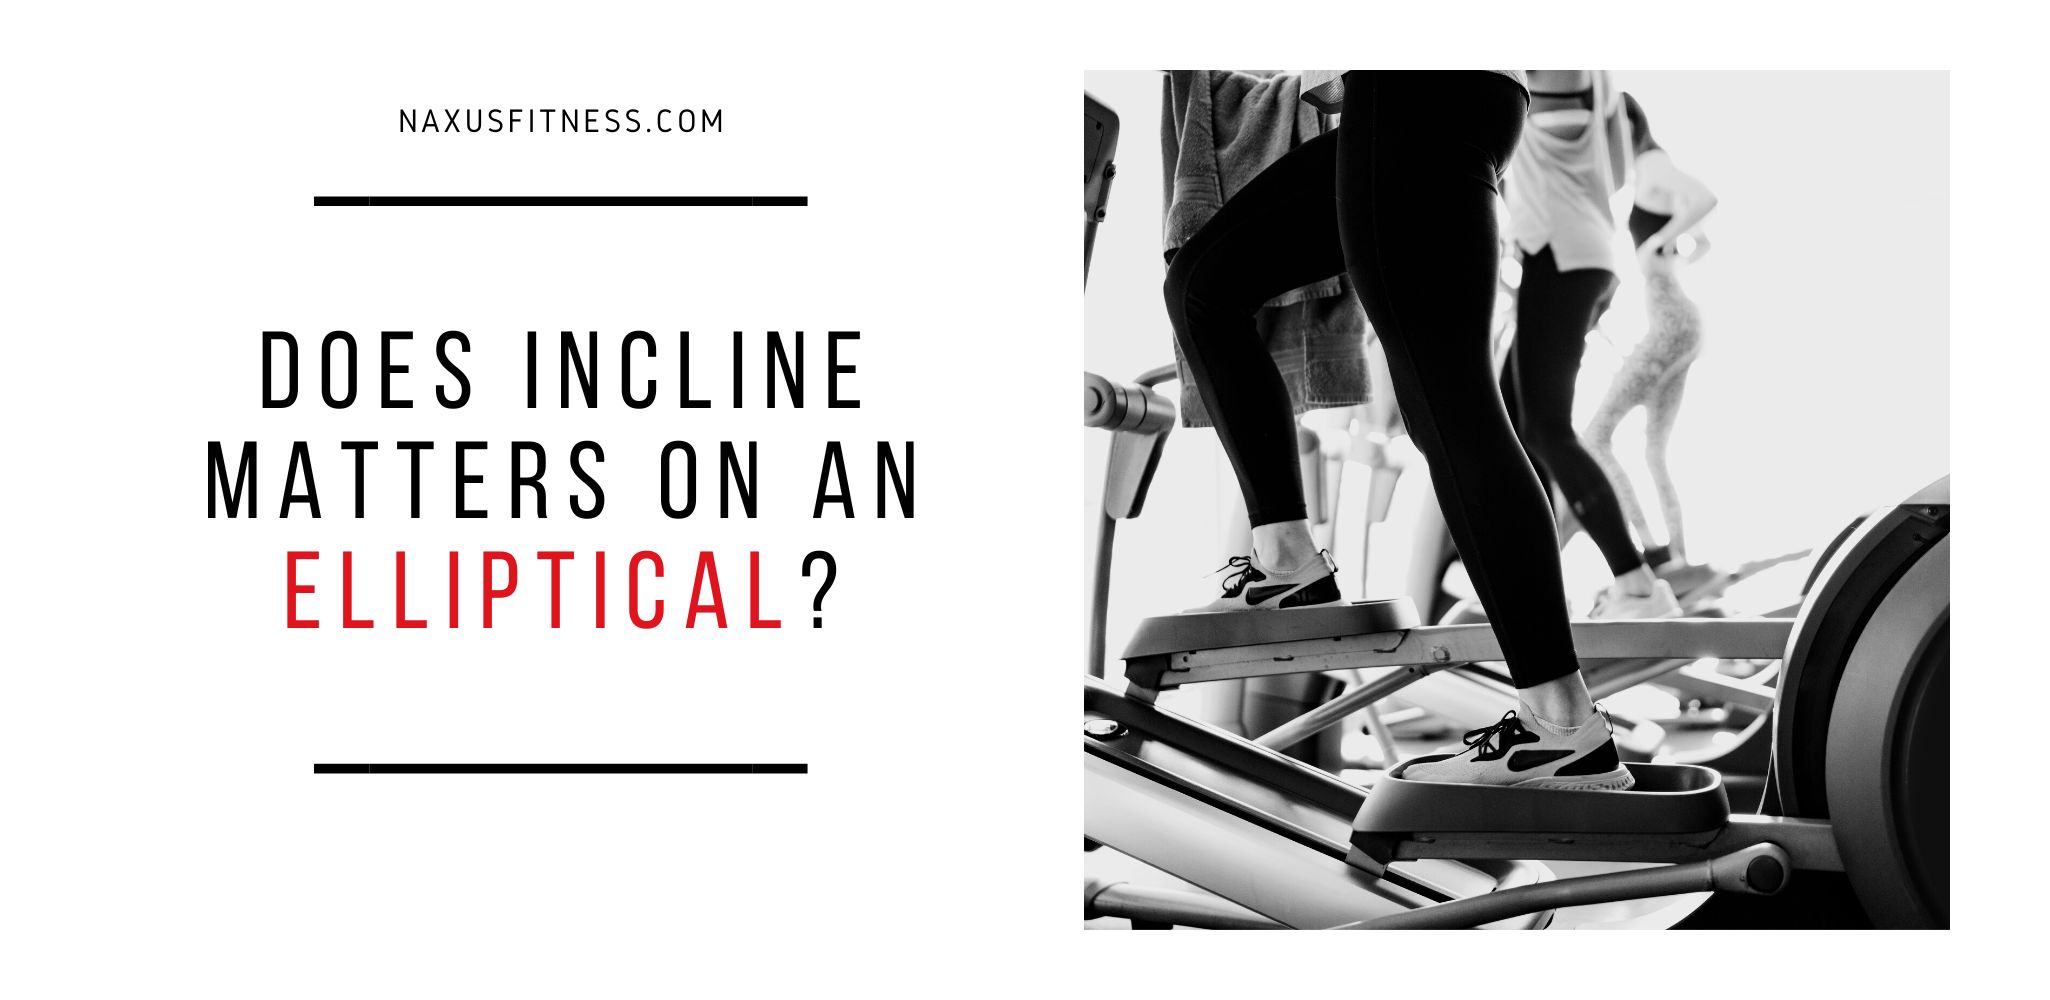 Does Incline matter on the elliptical?